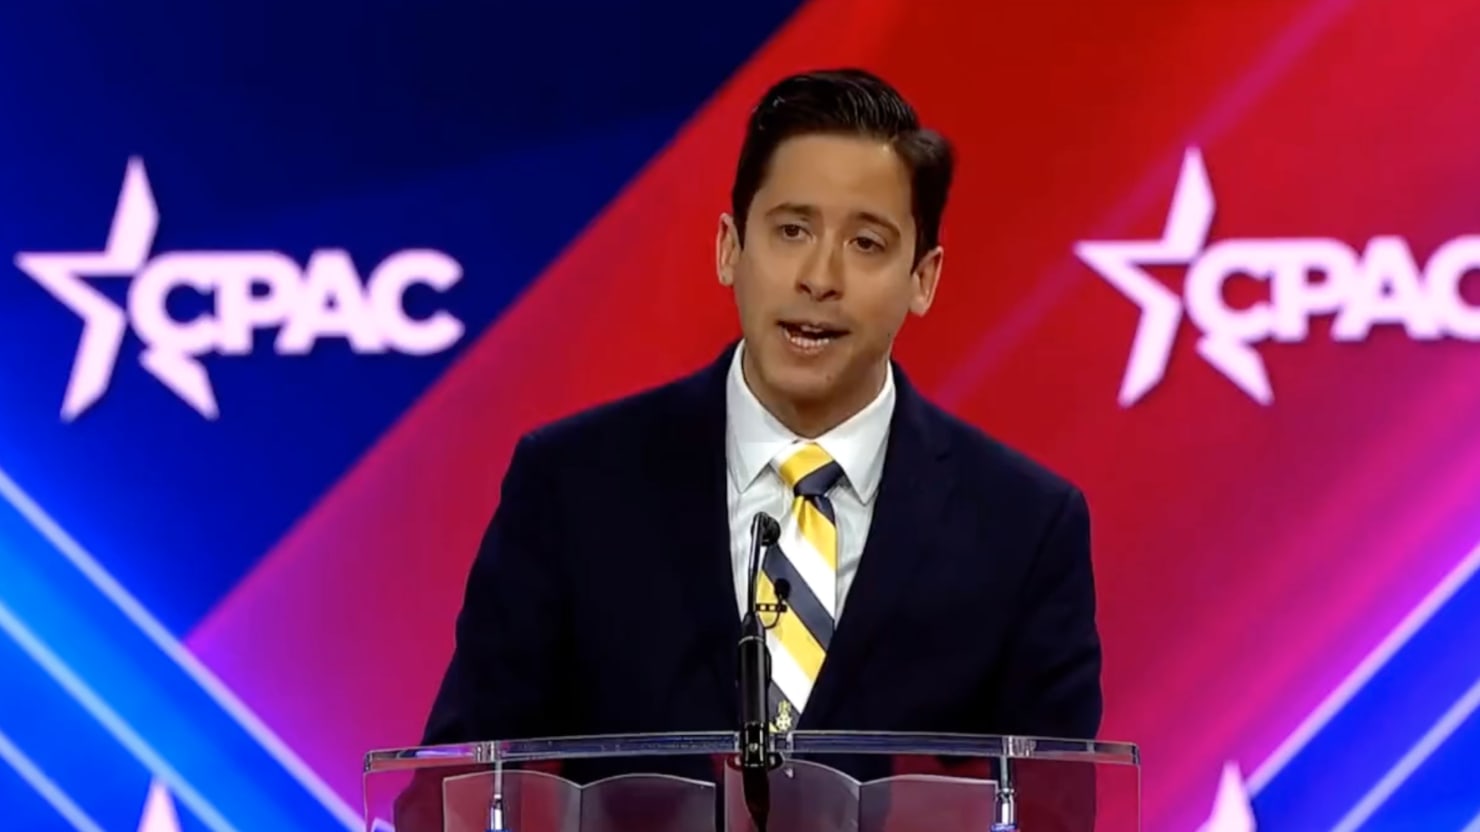 Michael Knowles Says Transgender Community Must ‘Get Rid of’ at CPAC